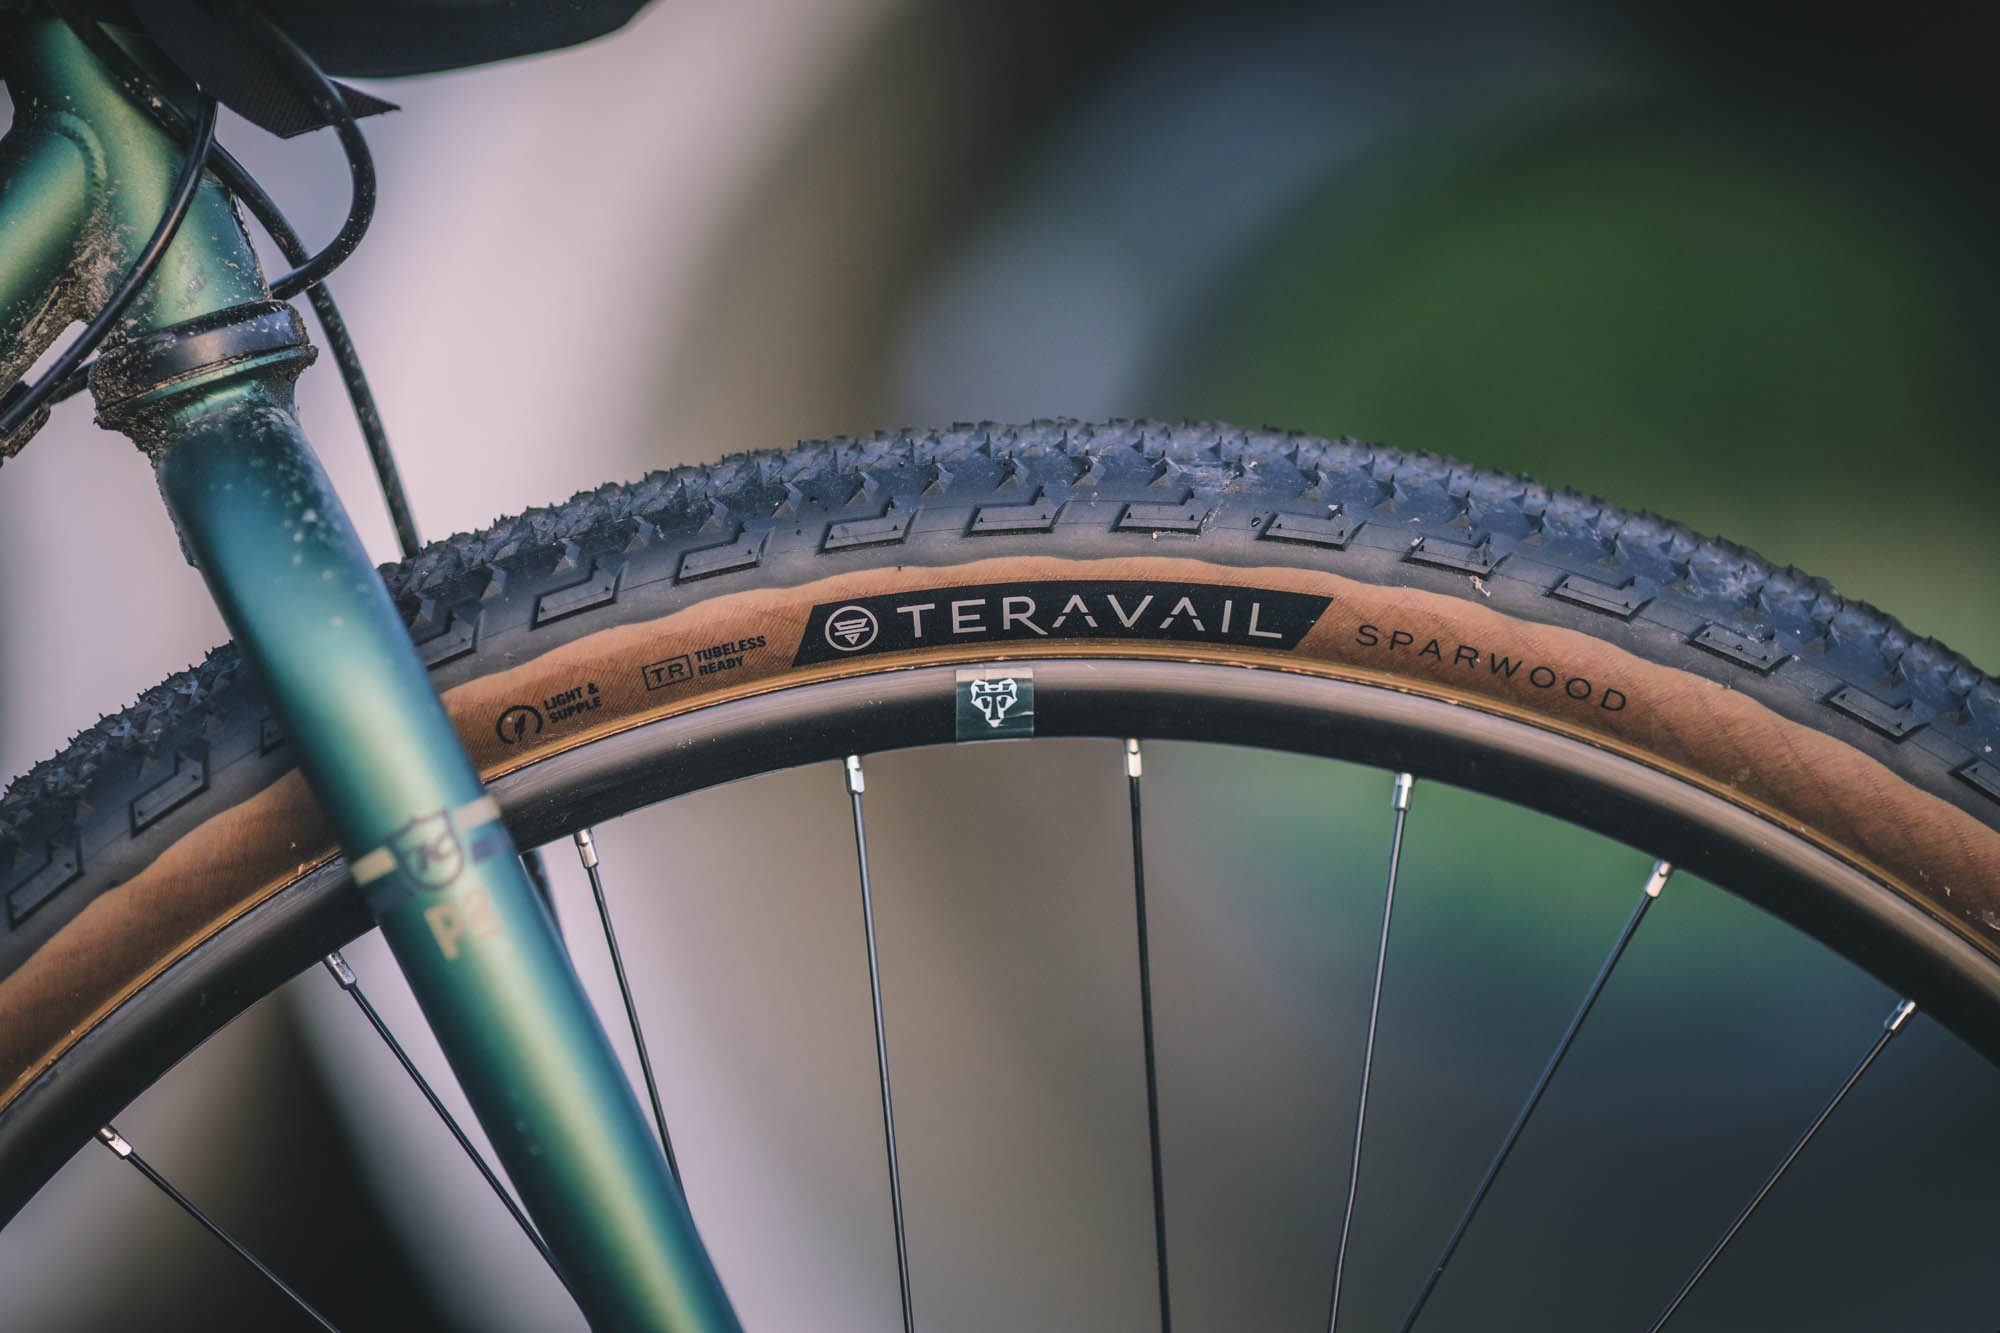 New Teravail Skinwall Tires + Sparwood First Look - BIKEPACKING.com